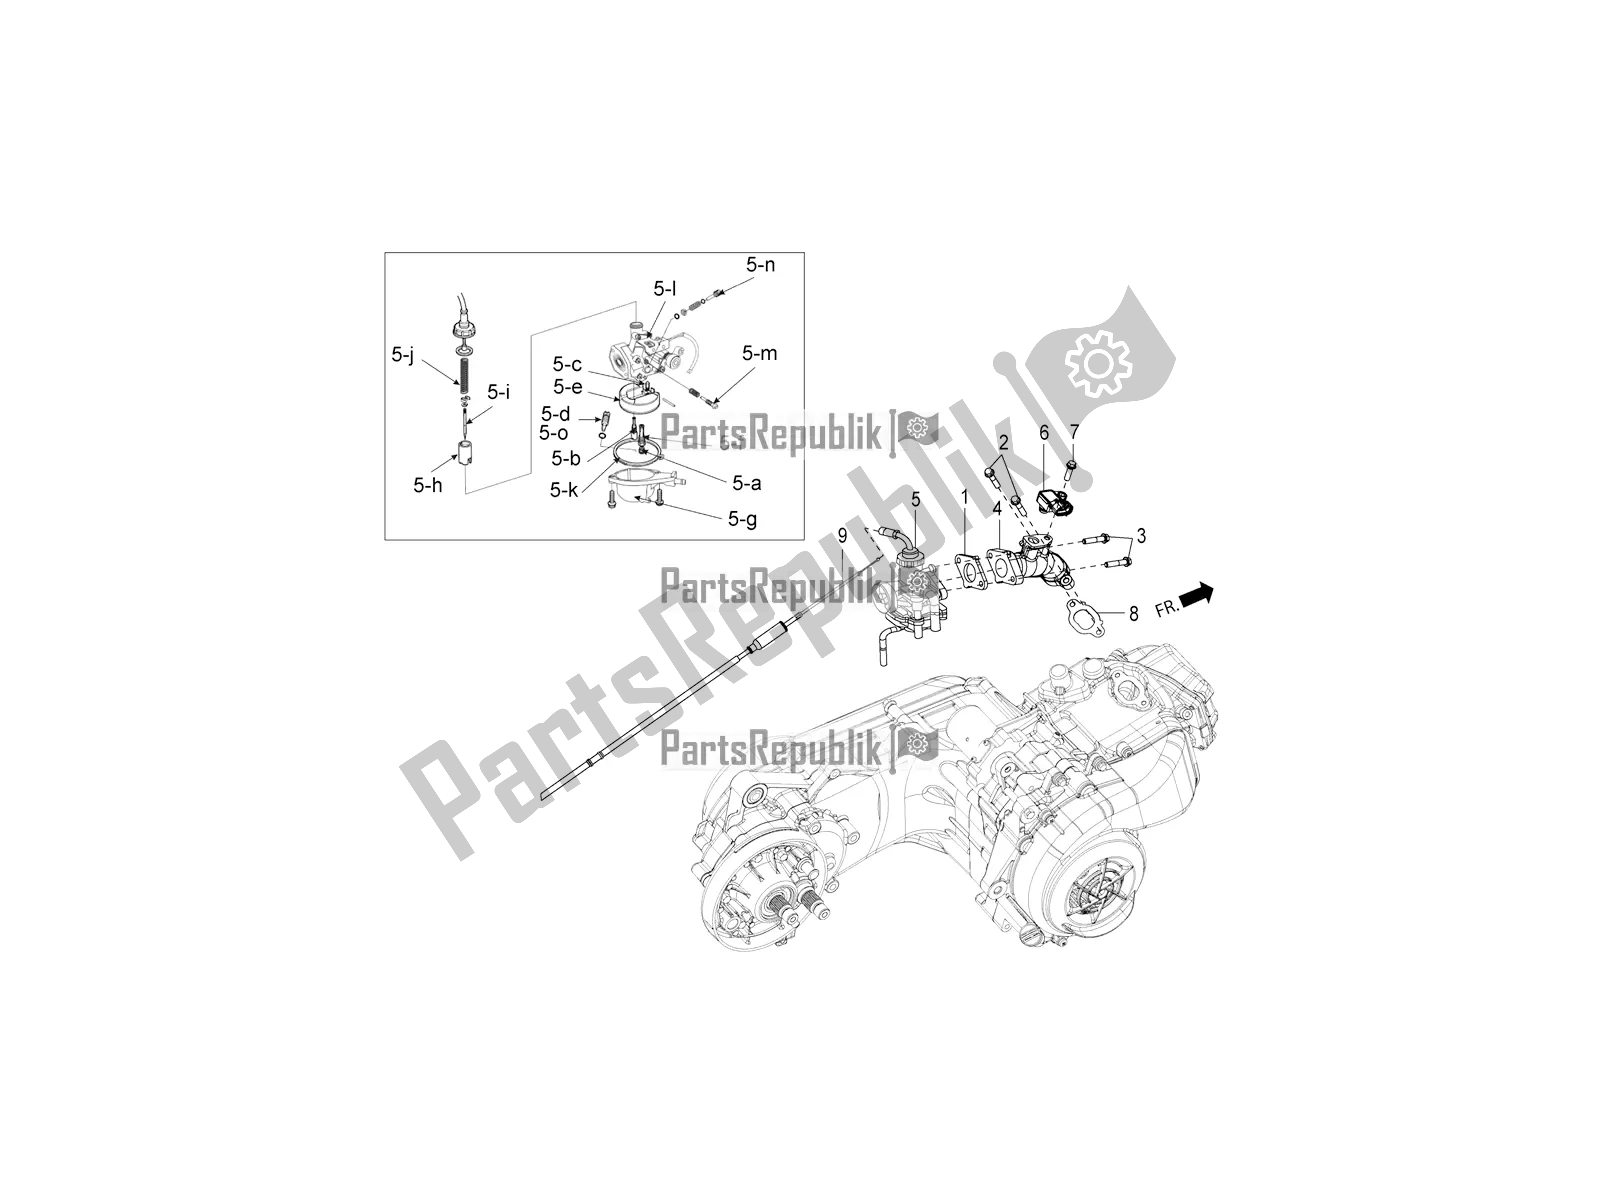 All parts for the Carburettor-spare Parts of the Aprilia SR Motard 150 ABS Apac 2021